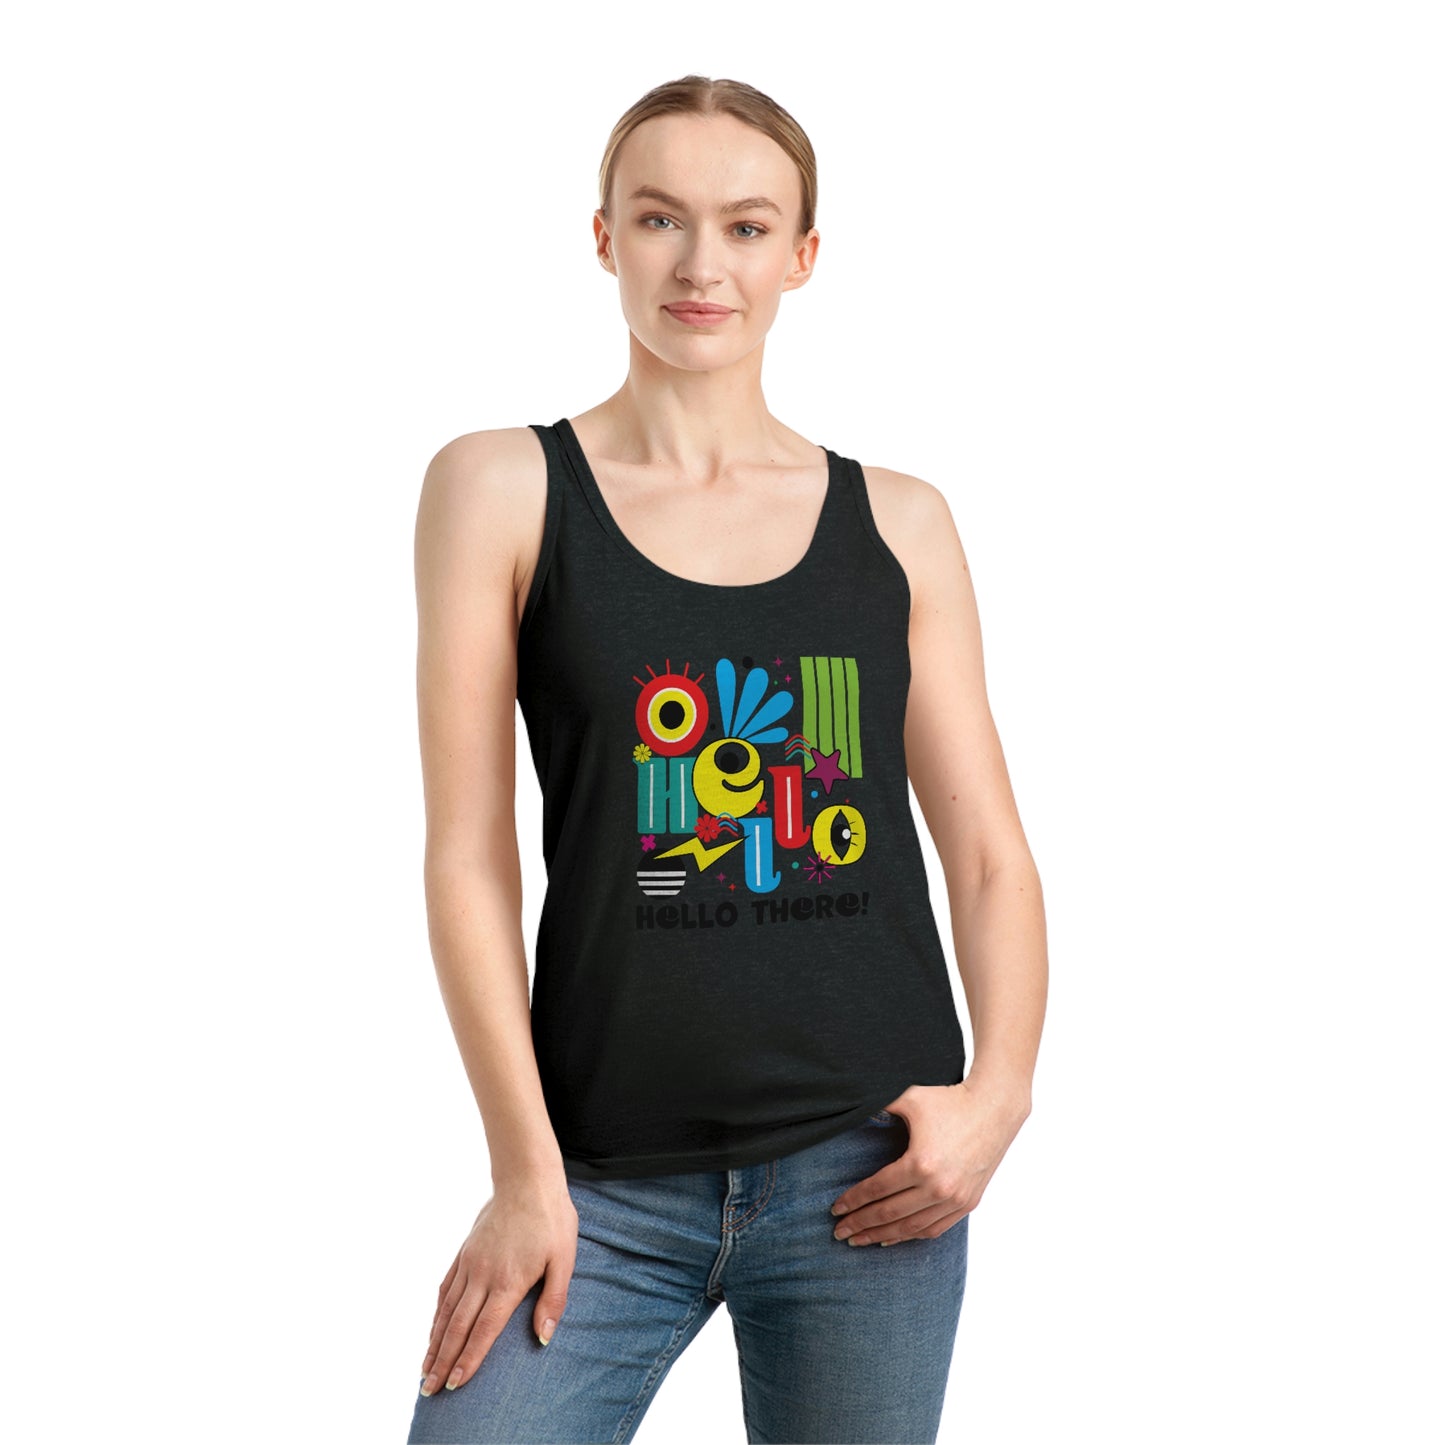 Hello There - Colorful Women's Dreamer Tank Top - HobbyMeFree